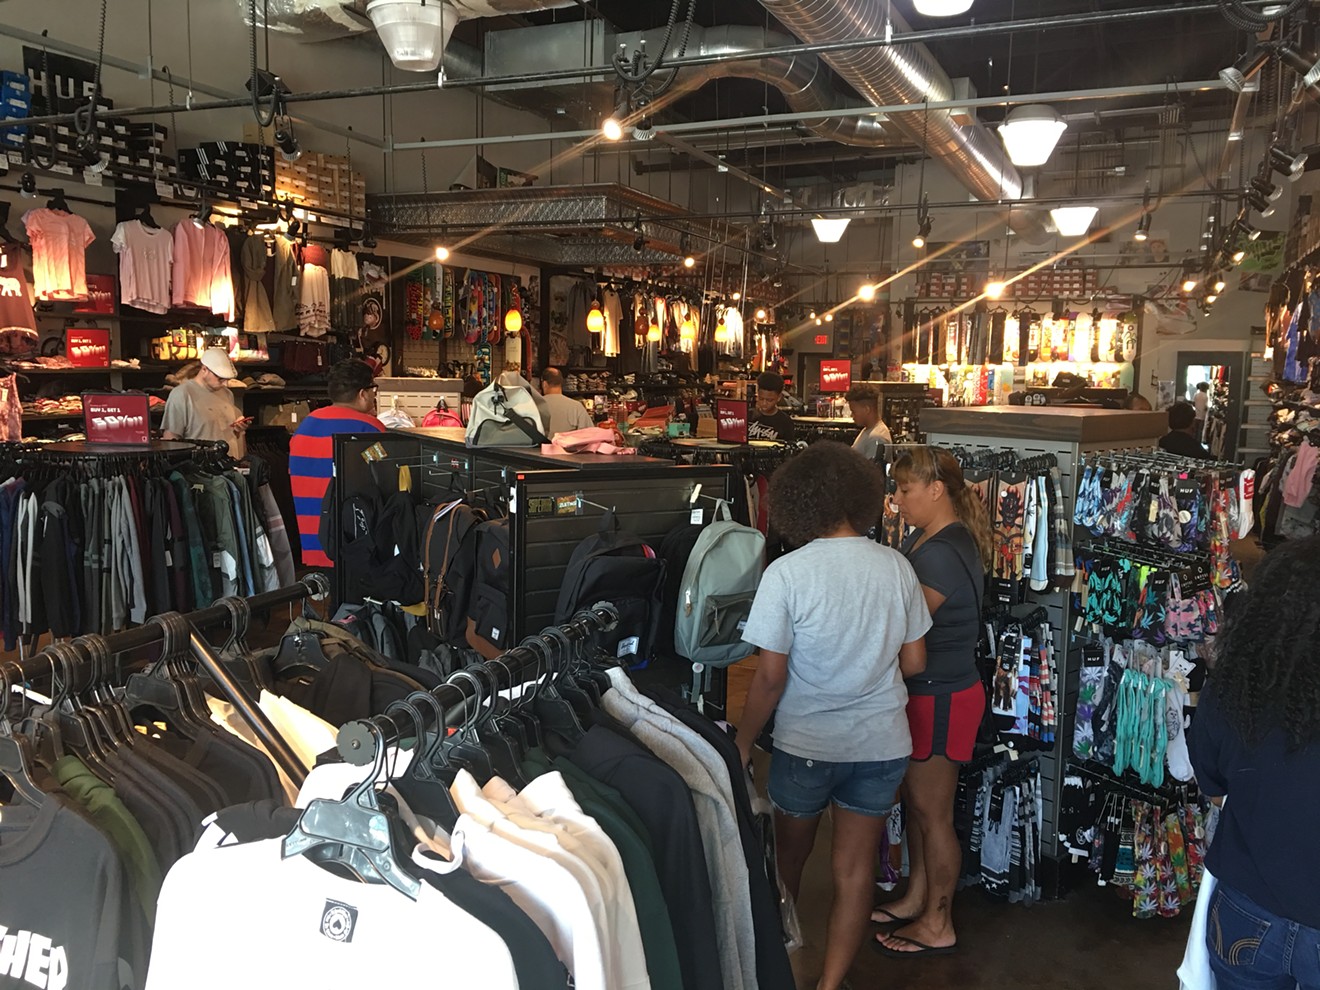 One of the stores, Zumiez, favored by kids in search of this year's hottest back-to-school trends.